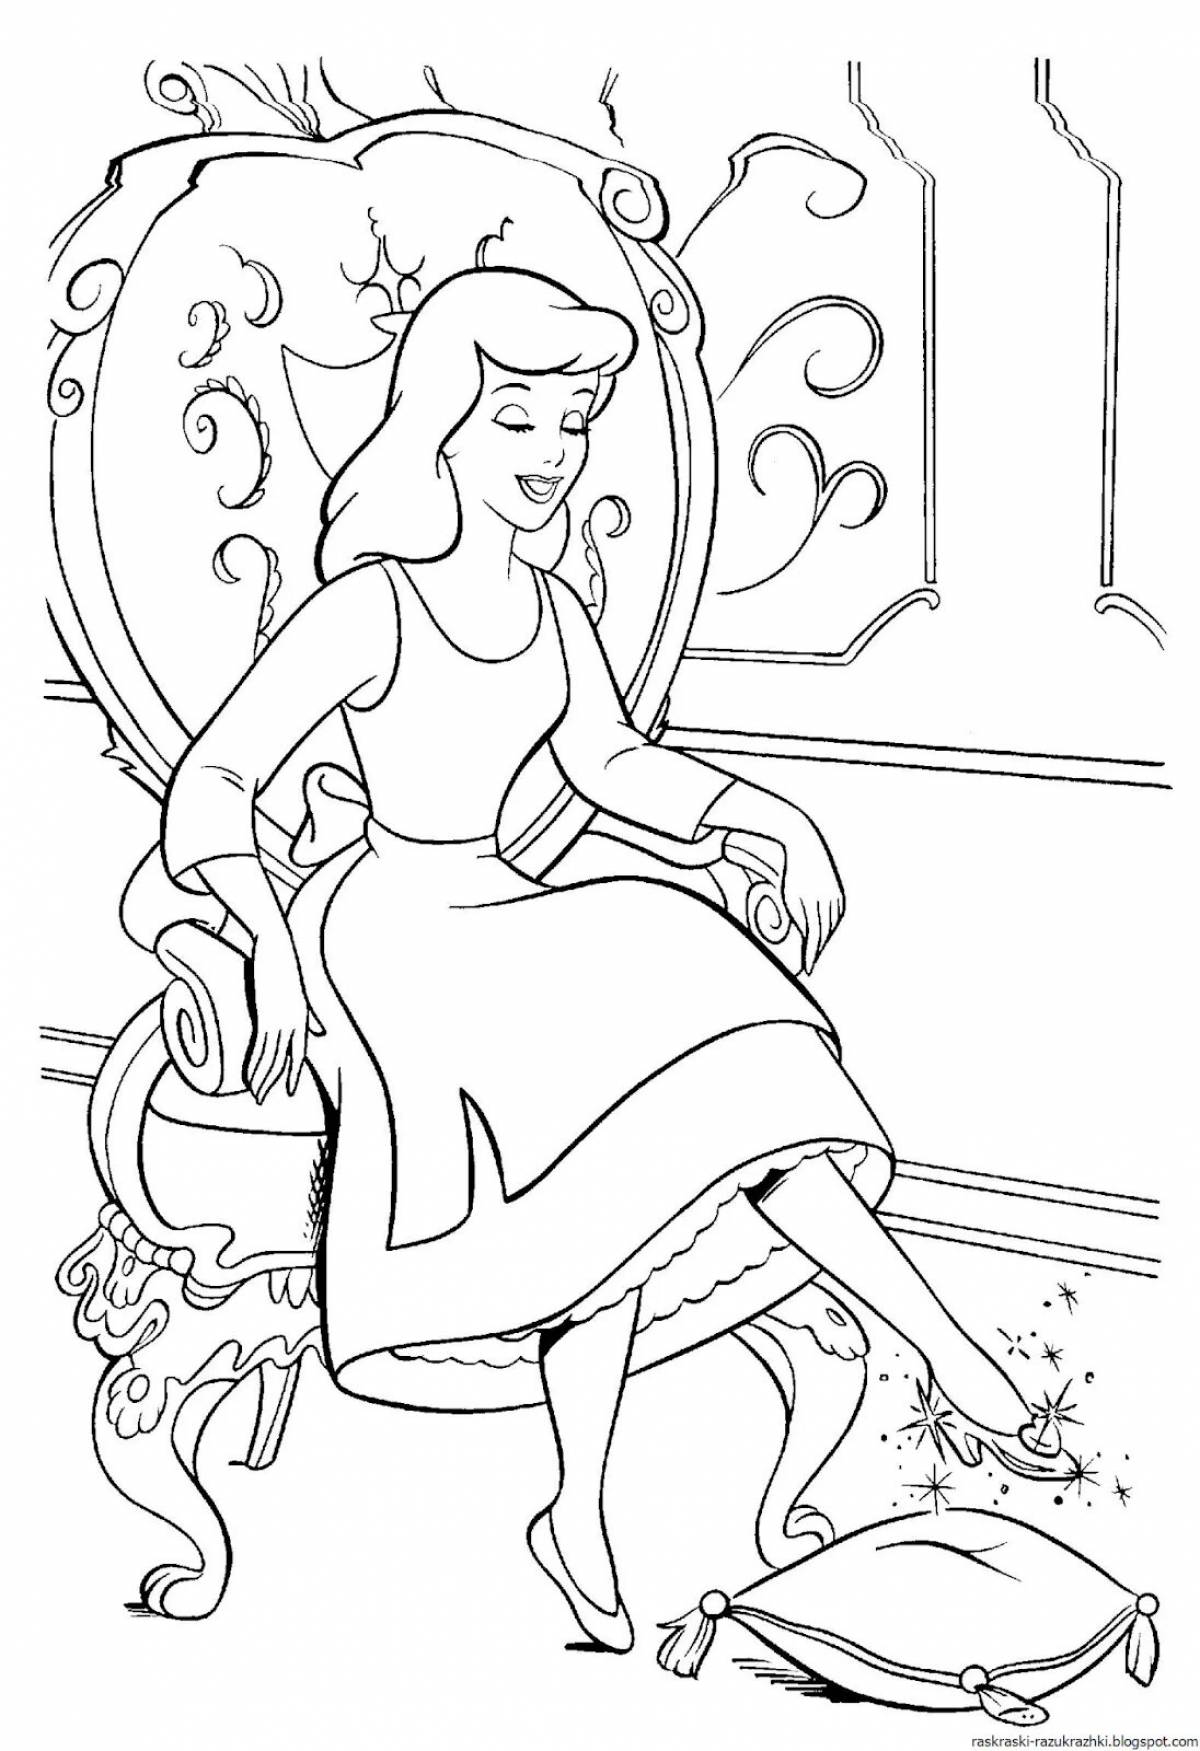 Big Cinderella coloring pages for kids